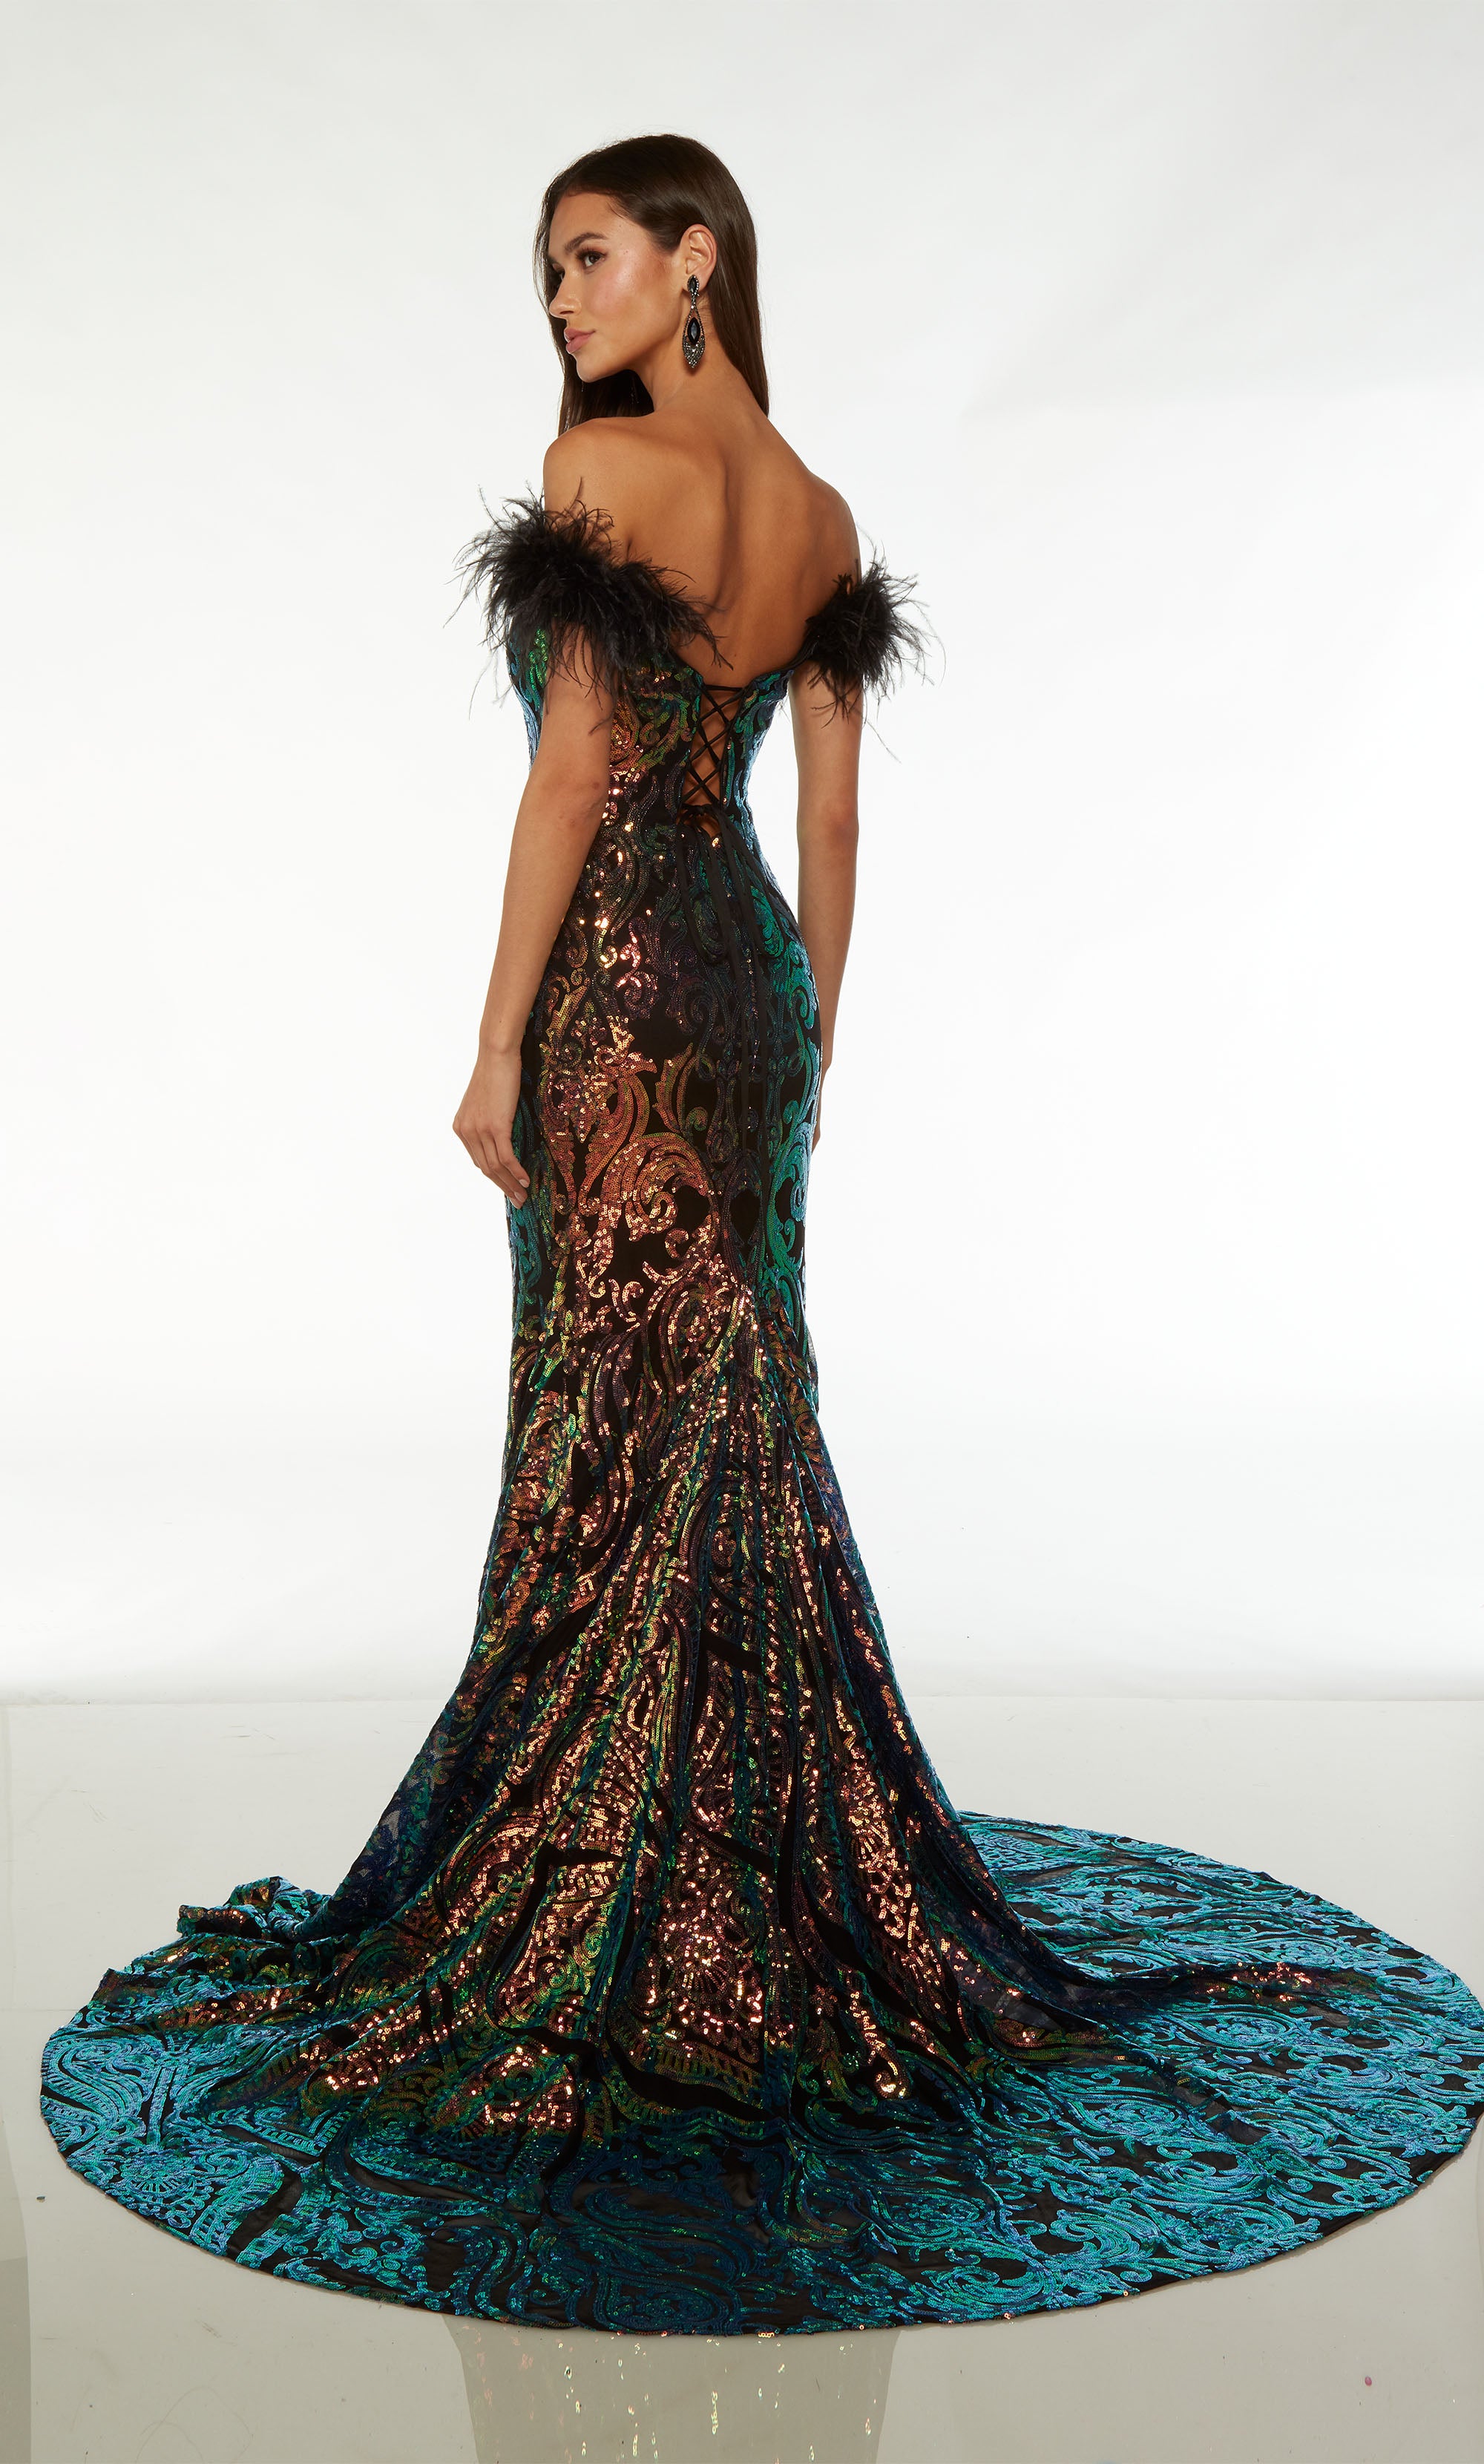 Iridescent Sequin Lace-Up-Back Long Prom Dress